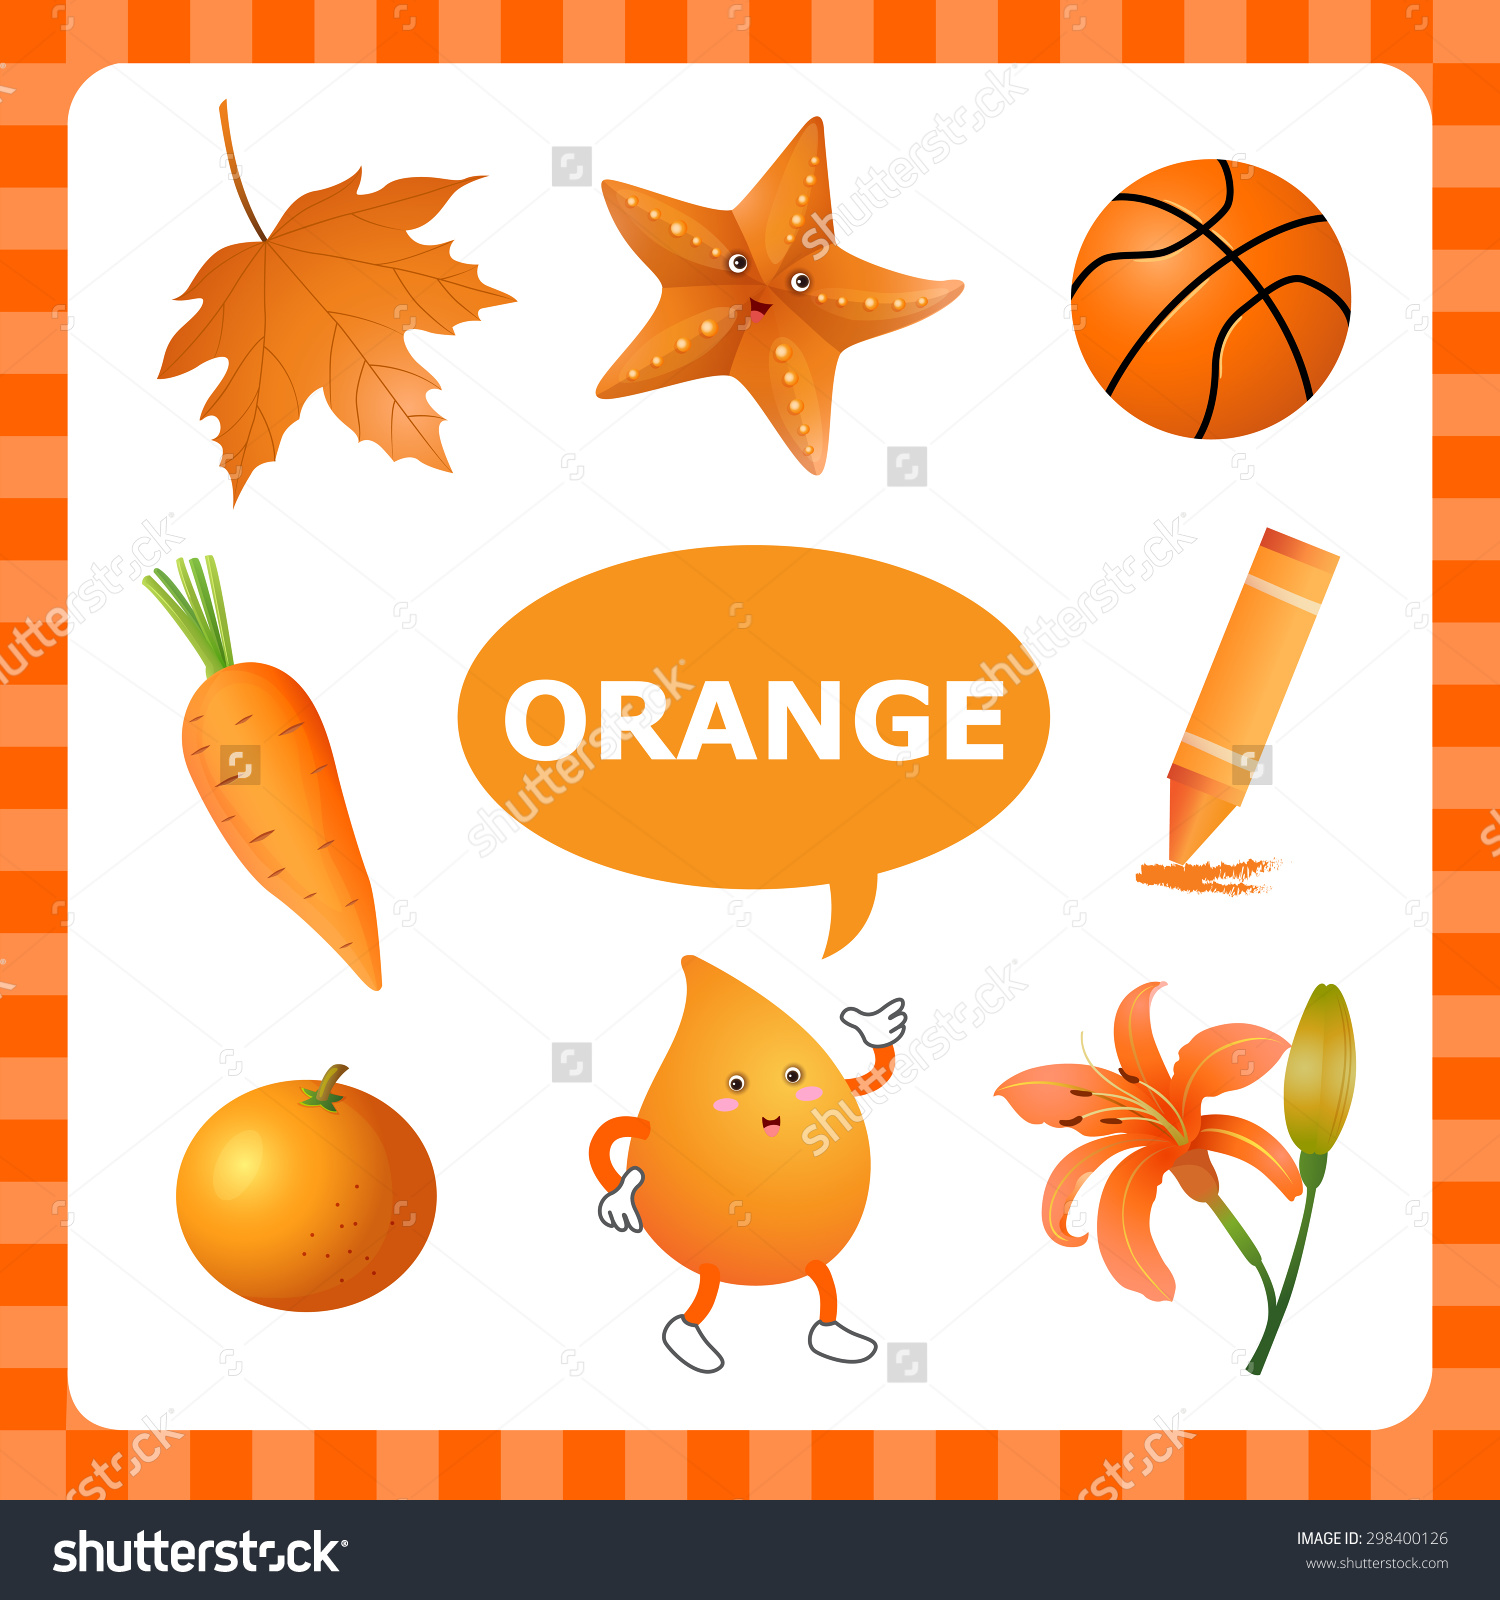 Orange Things Clipart - ClipartXtras